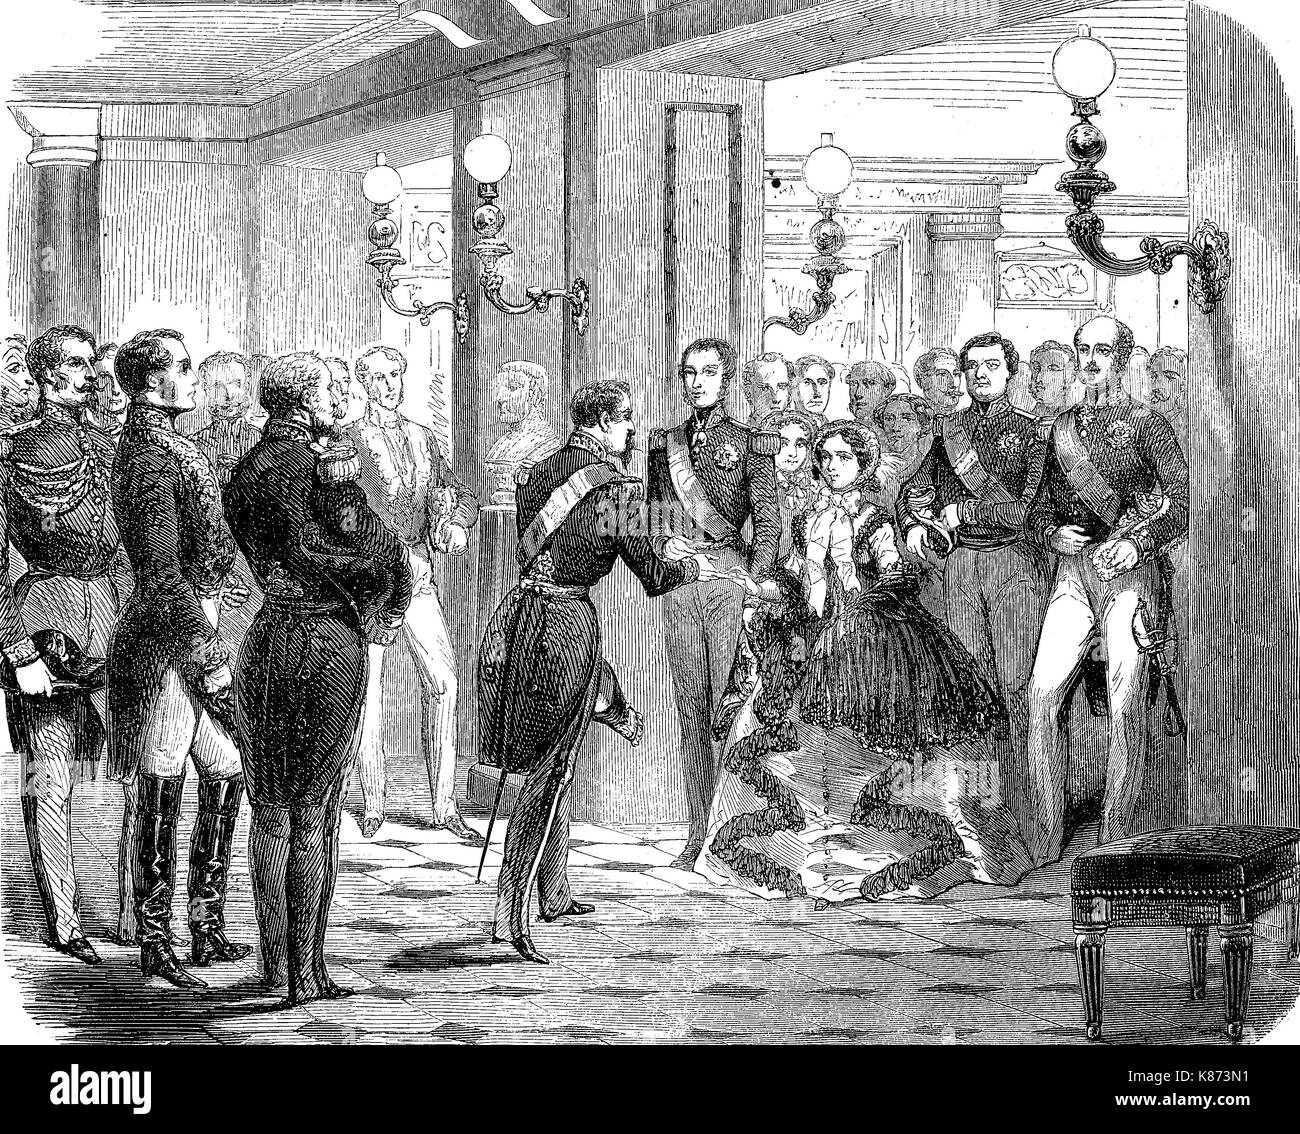 Crimean War, Reception of the Duke and Duchess of Brabant in the castle at St. Cloud, France, on October 12, 1855, Digital improved reproduction of an original woodprint from the 19th century Stock Photo